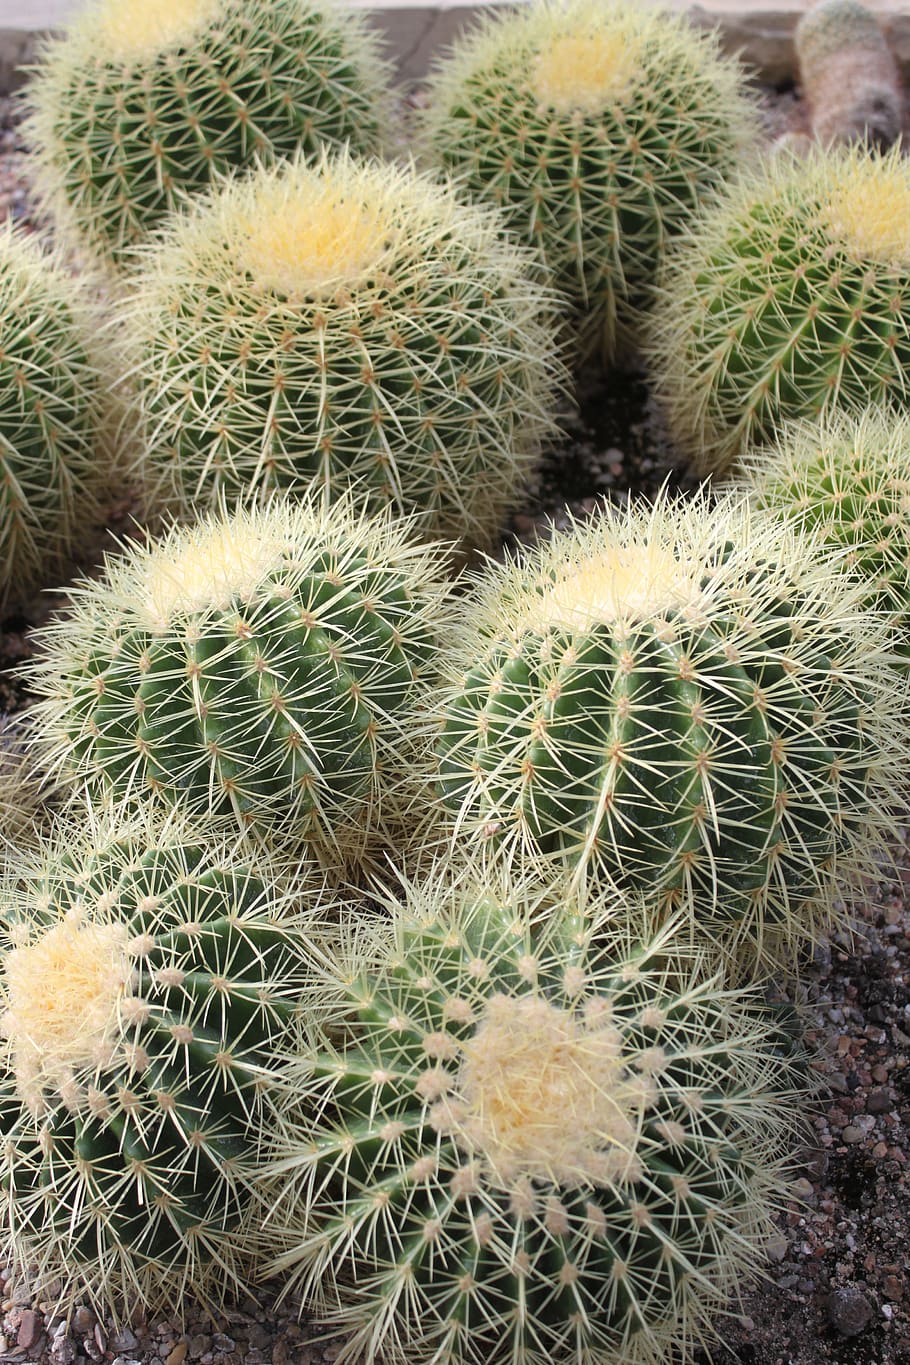 cacti, succulents, cactus, green, succulent plant, thorn, green color, barrel cactus, growth, spiked